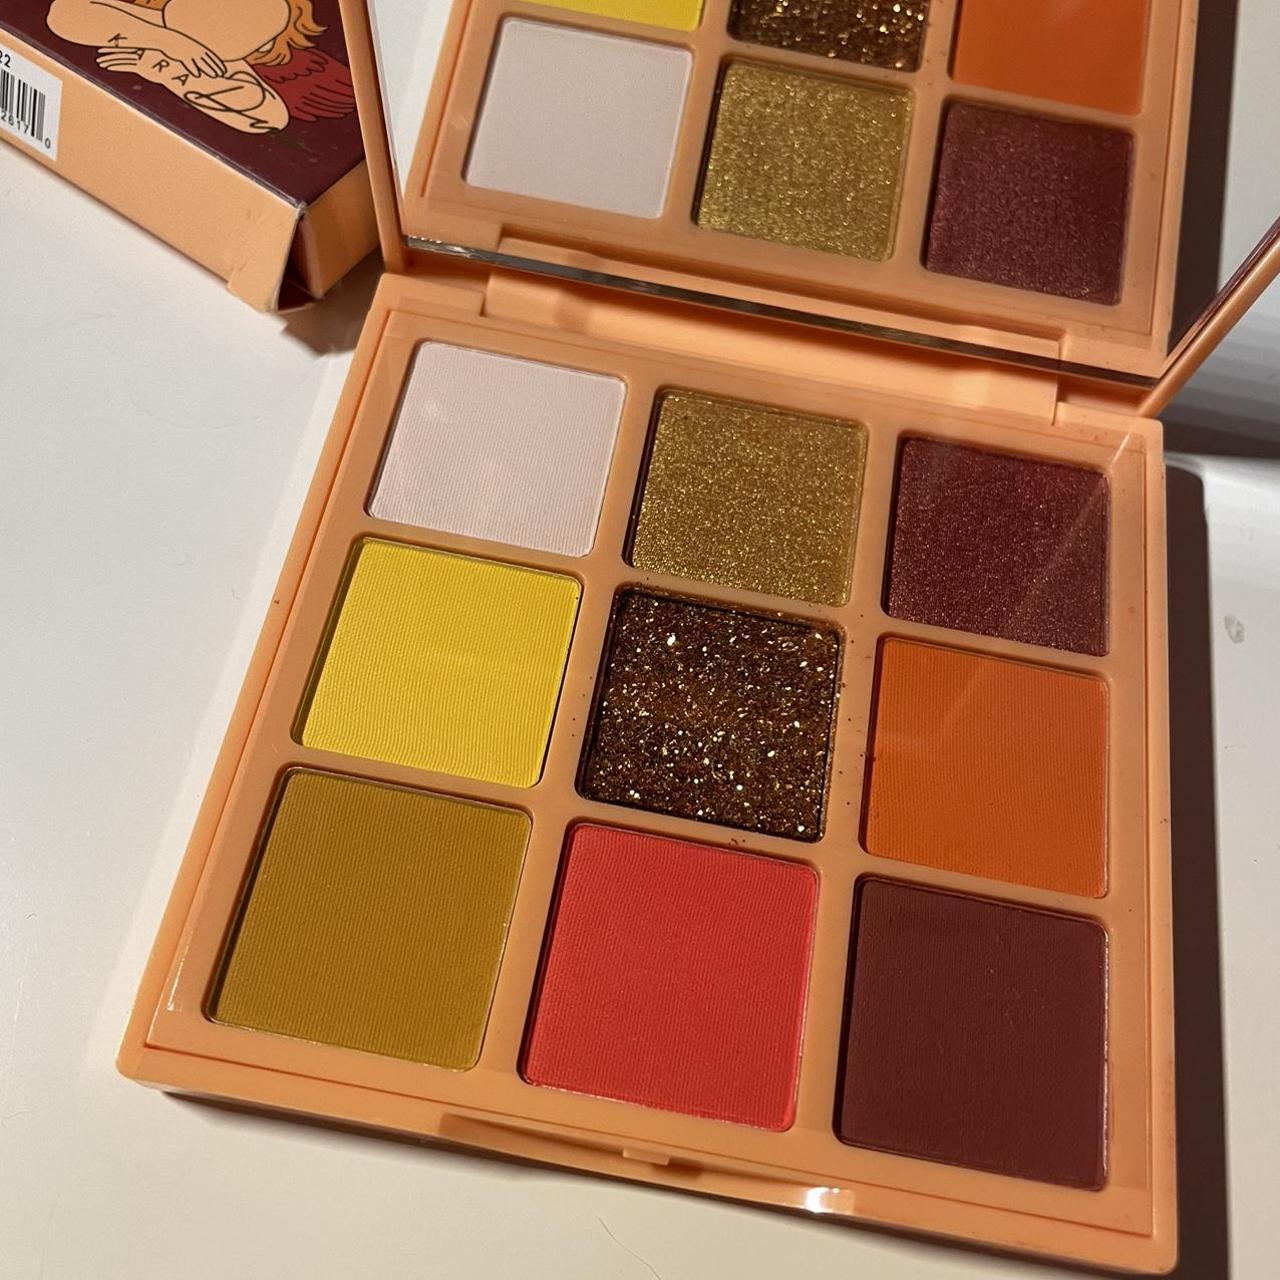 Product Image 2 - Kara Beauty Palette

Great colors for